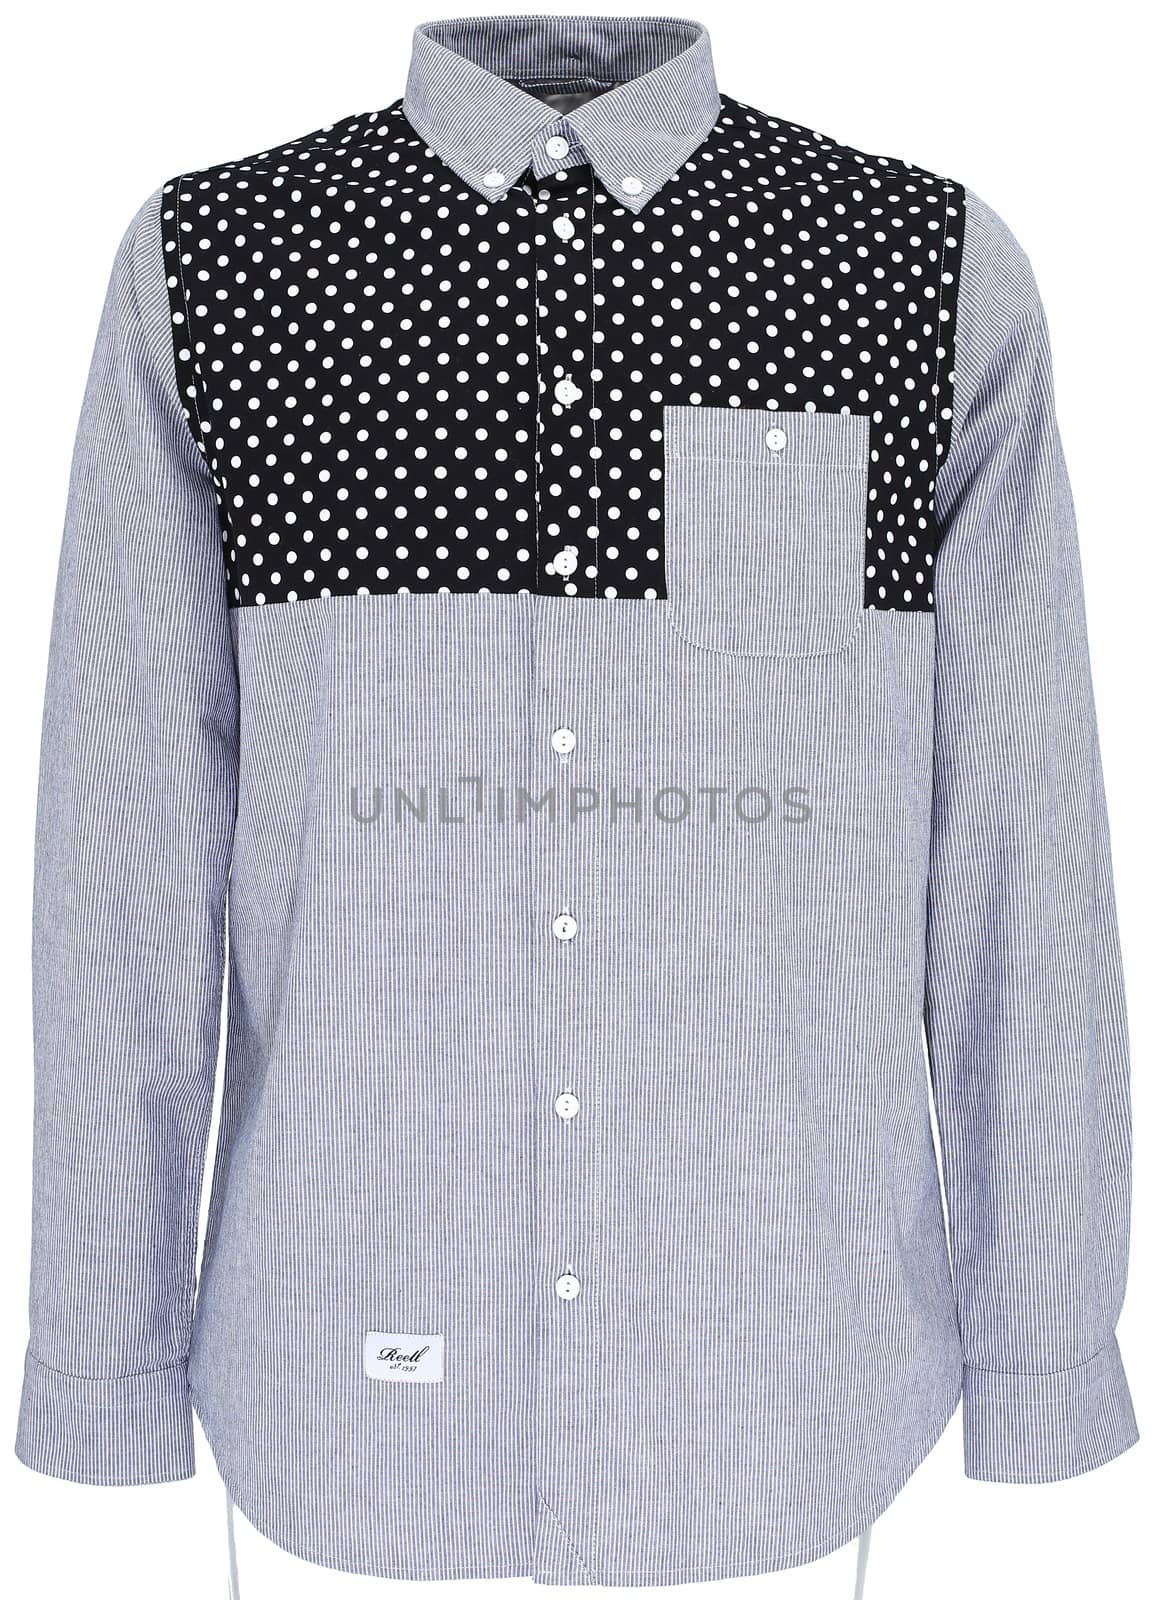 Light blue patterned shirt by sonalideo